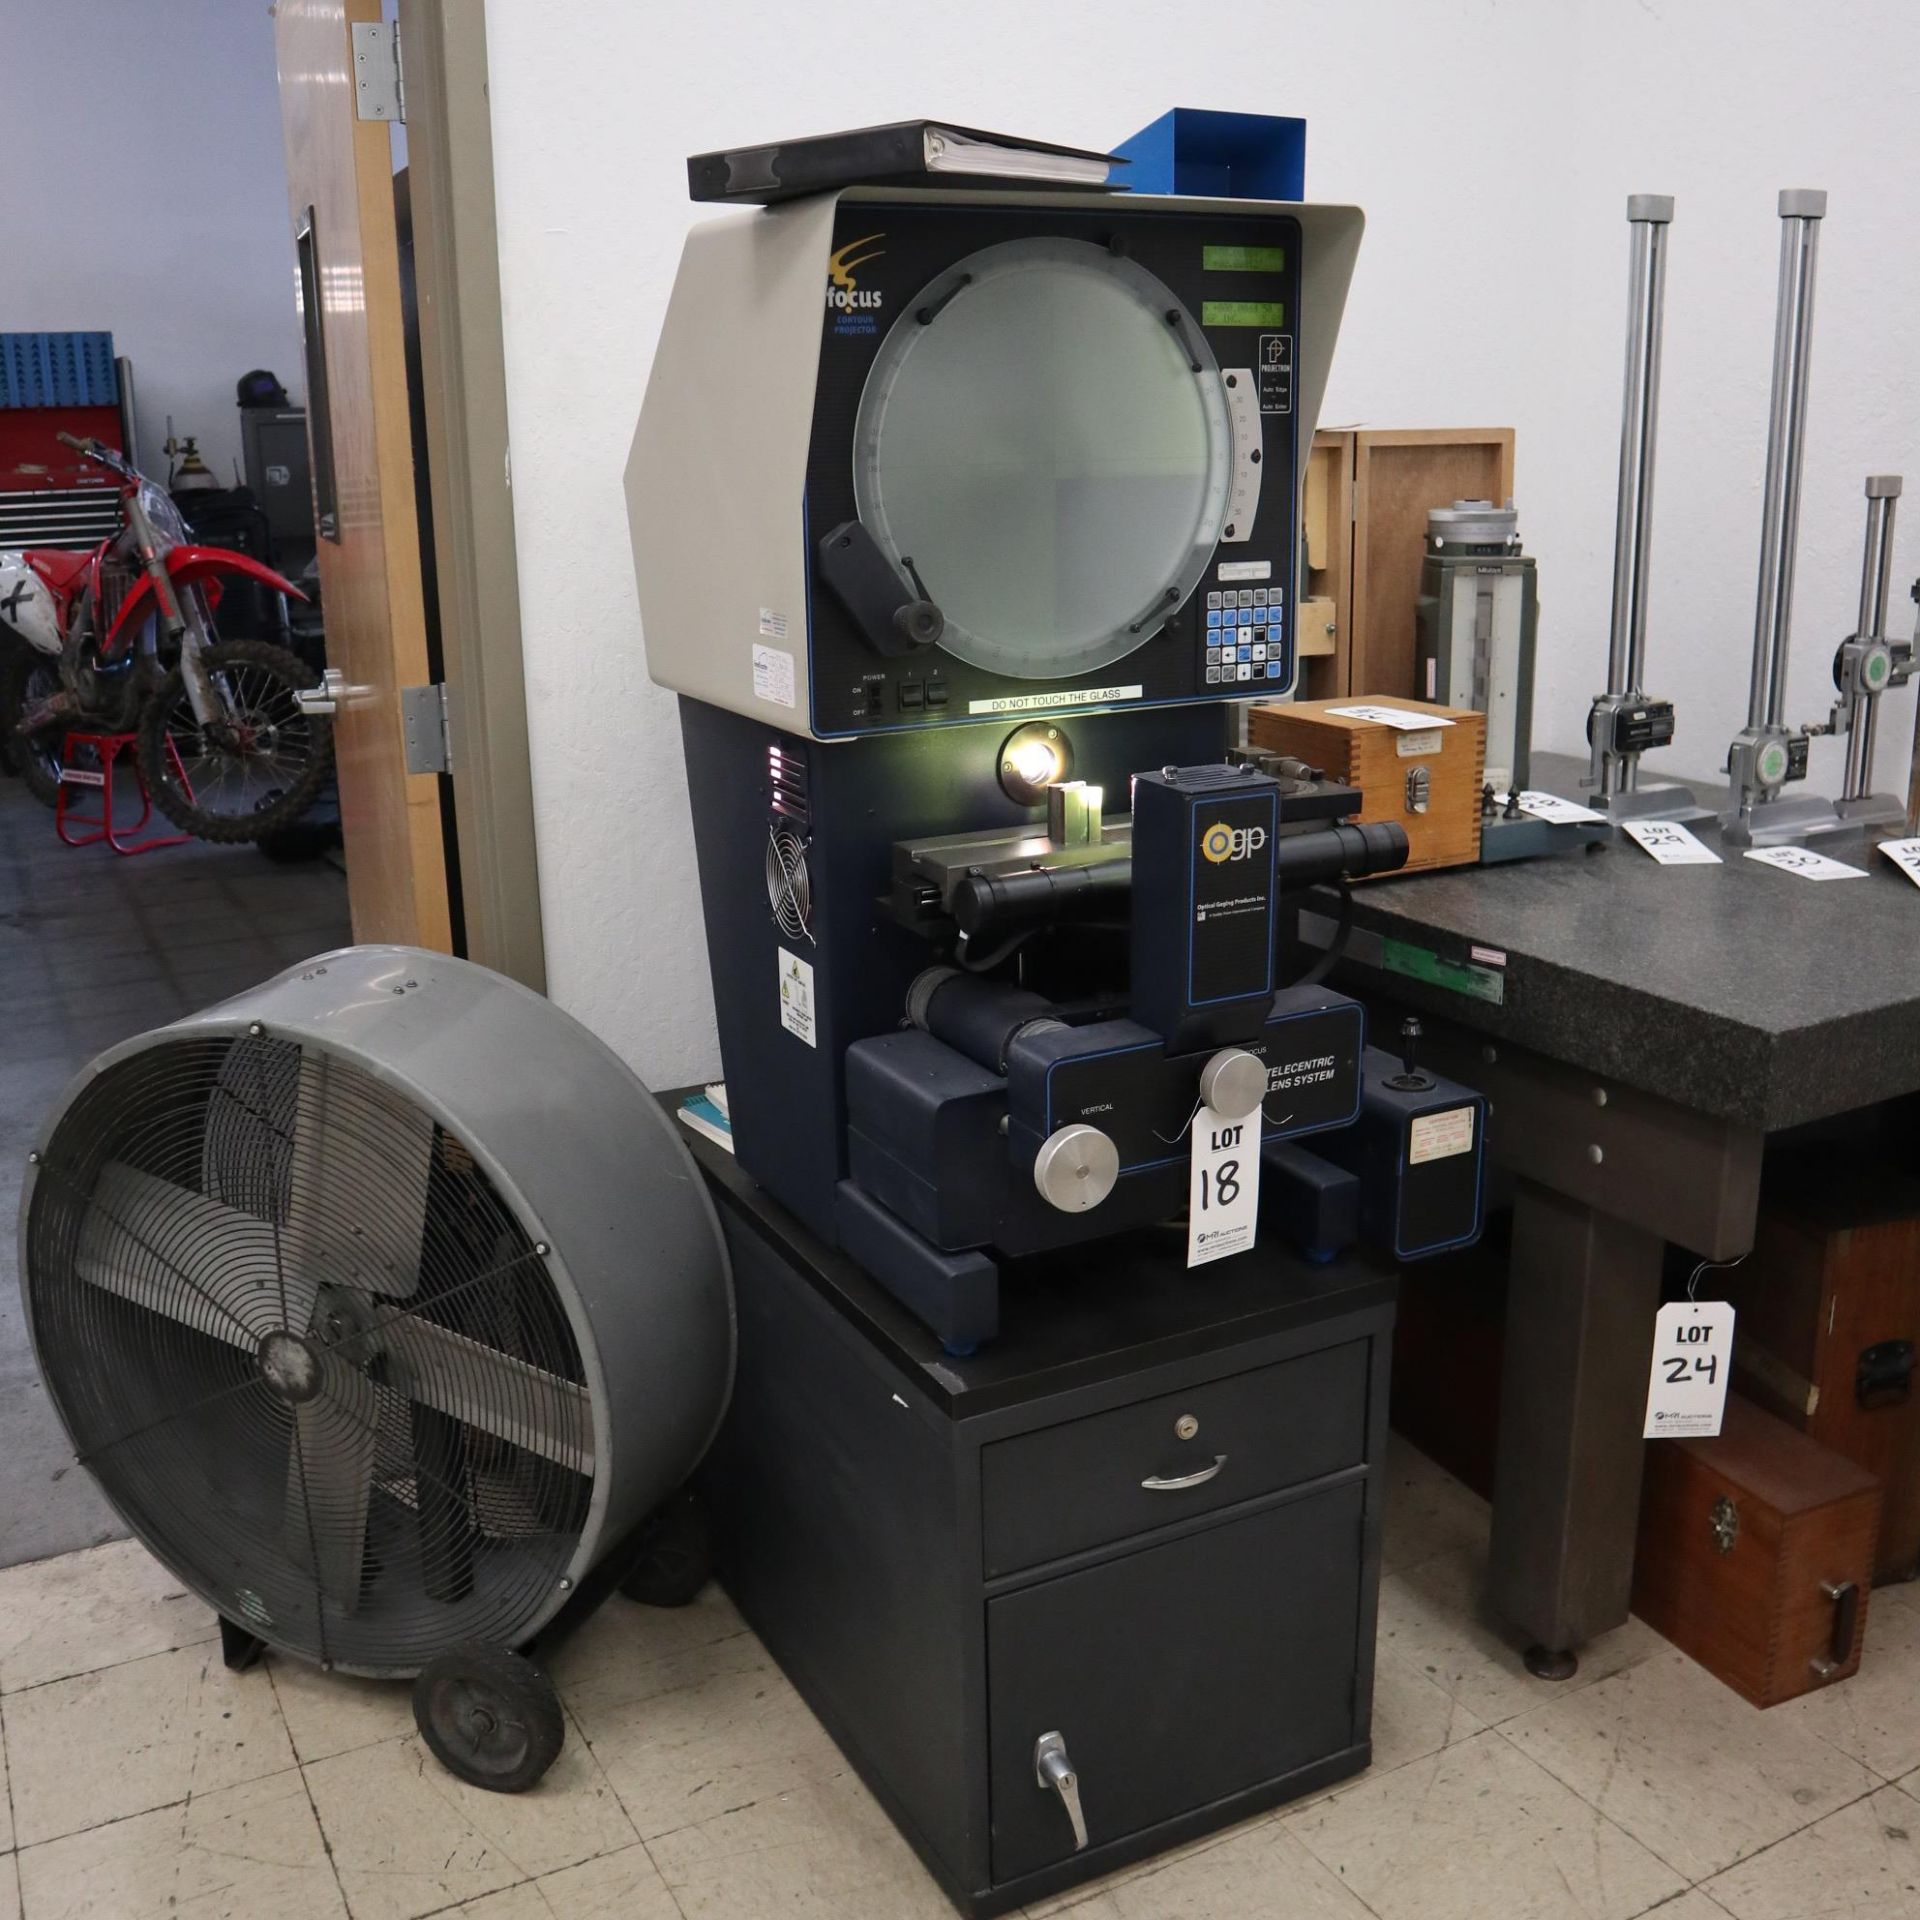 OPTICAL GAGING PRODUCTS FOCUS OPTICAL COMPARATOR, S/N FC2001101